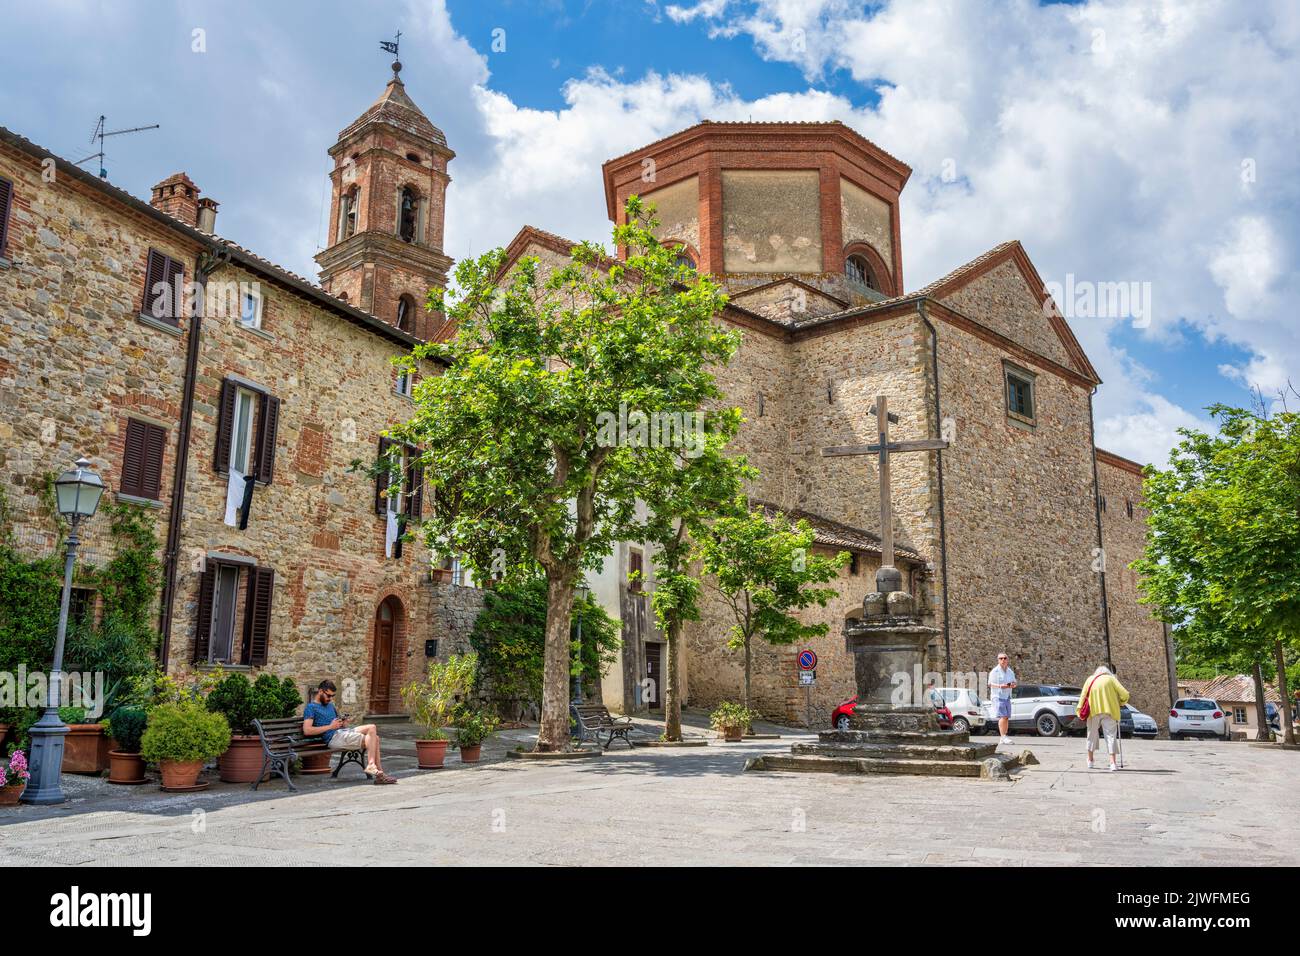 Collegiata di San Michele Arcangelo from Piazza del Tribunale in the medieval hilltop town of Lucignano in the Val di Chiana in Tuscany, Italy Stock Photo